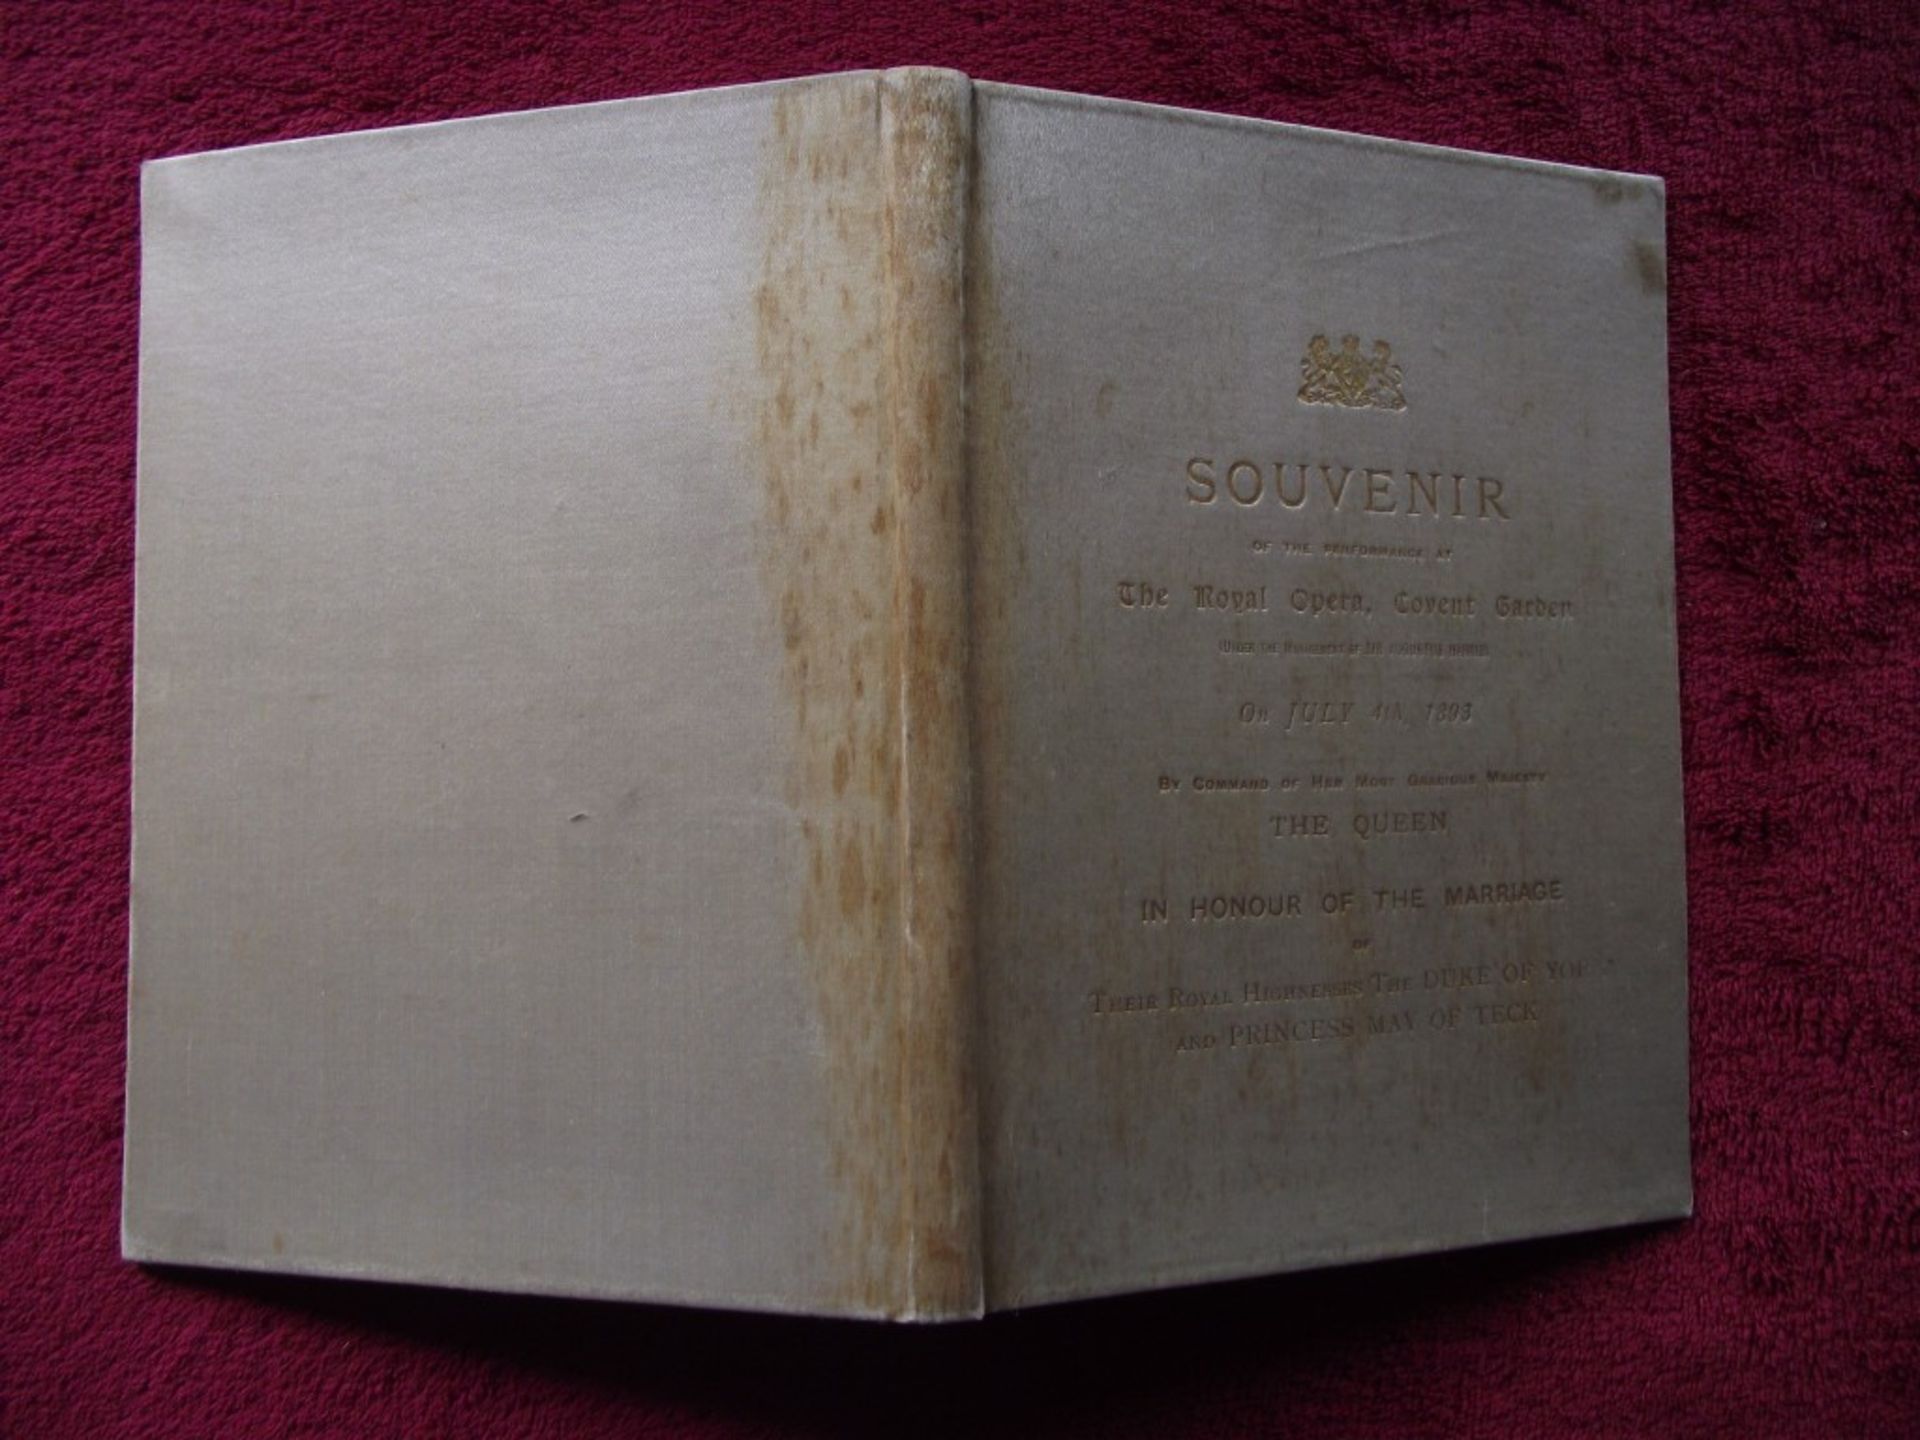 Souvenir of The Performance At The Royal Opera, Covent - July 4th, 1893 - Image 13 of 19